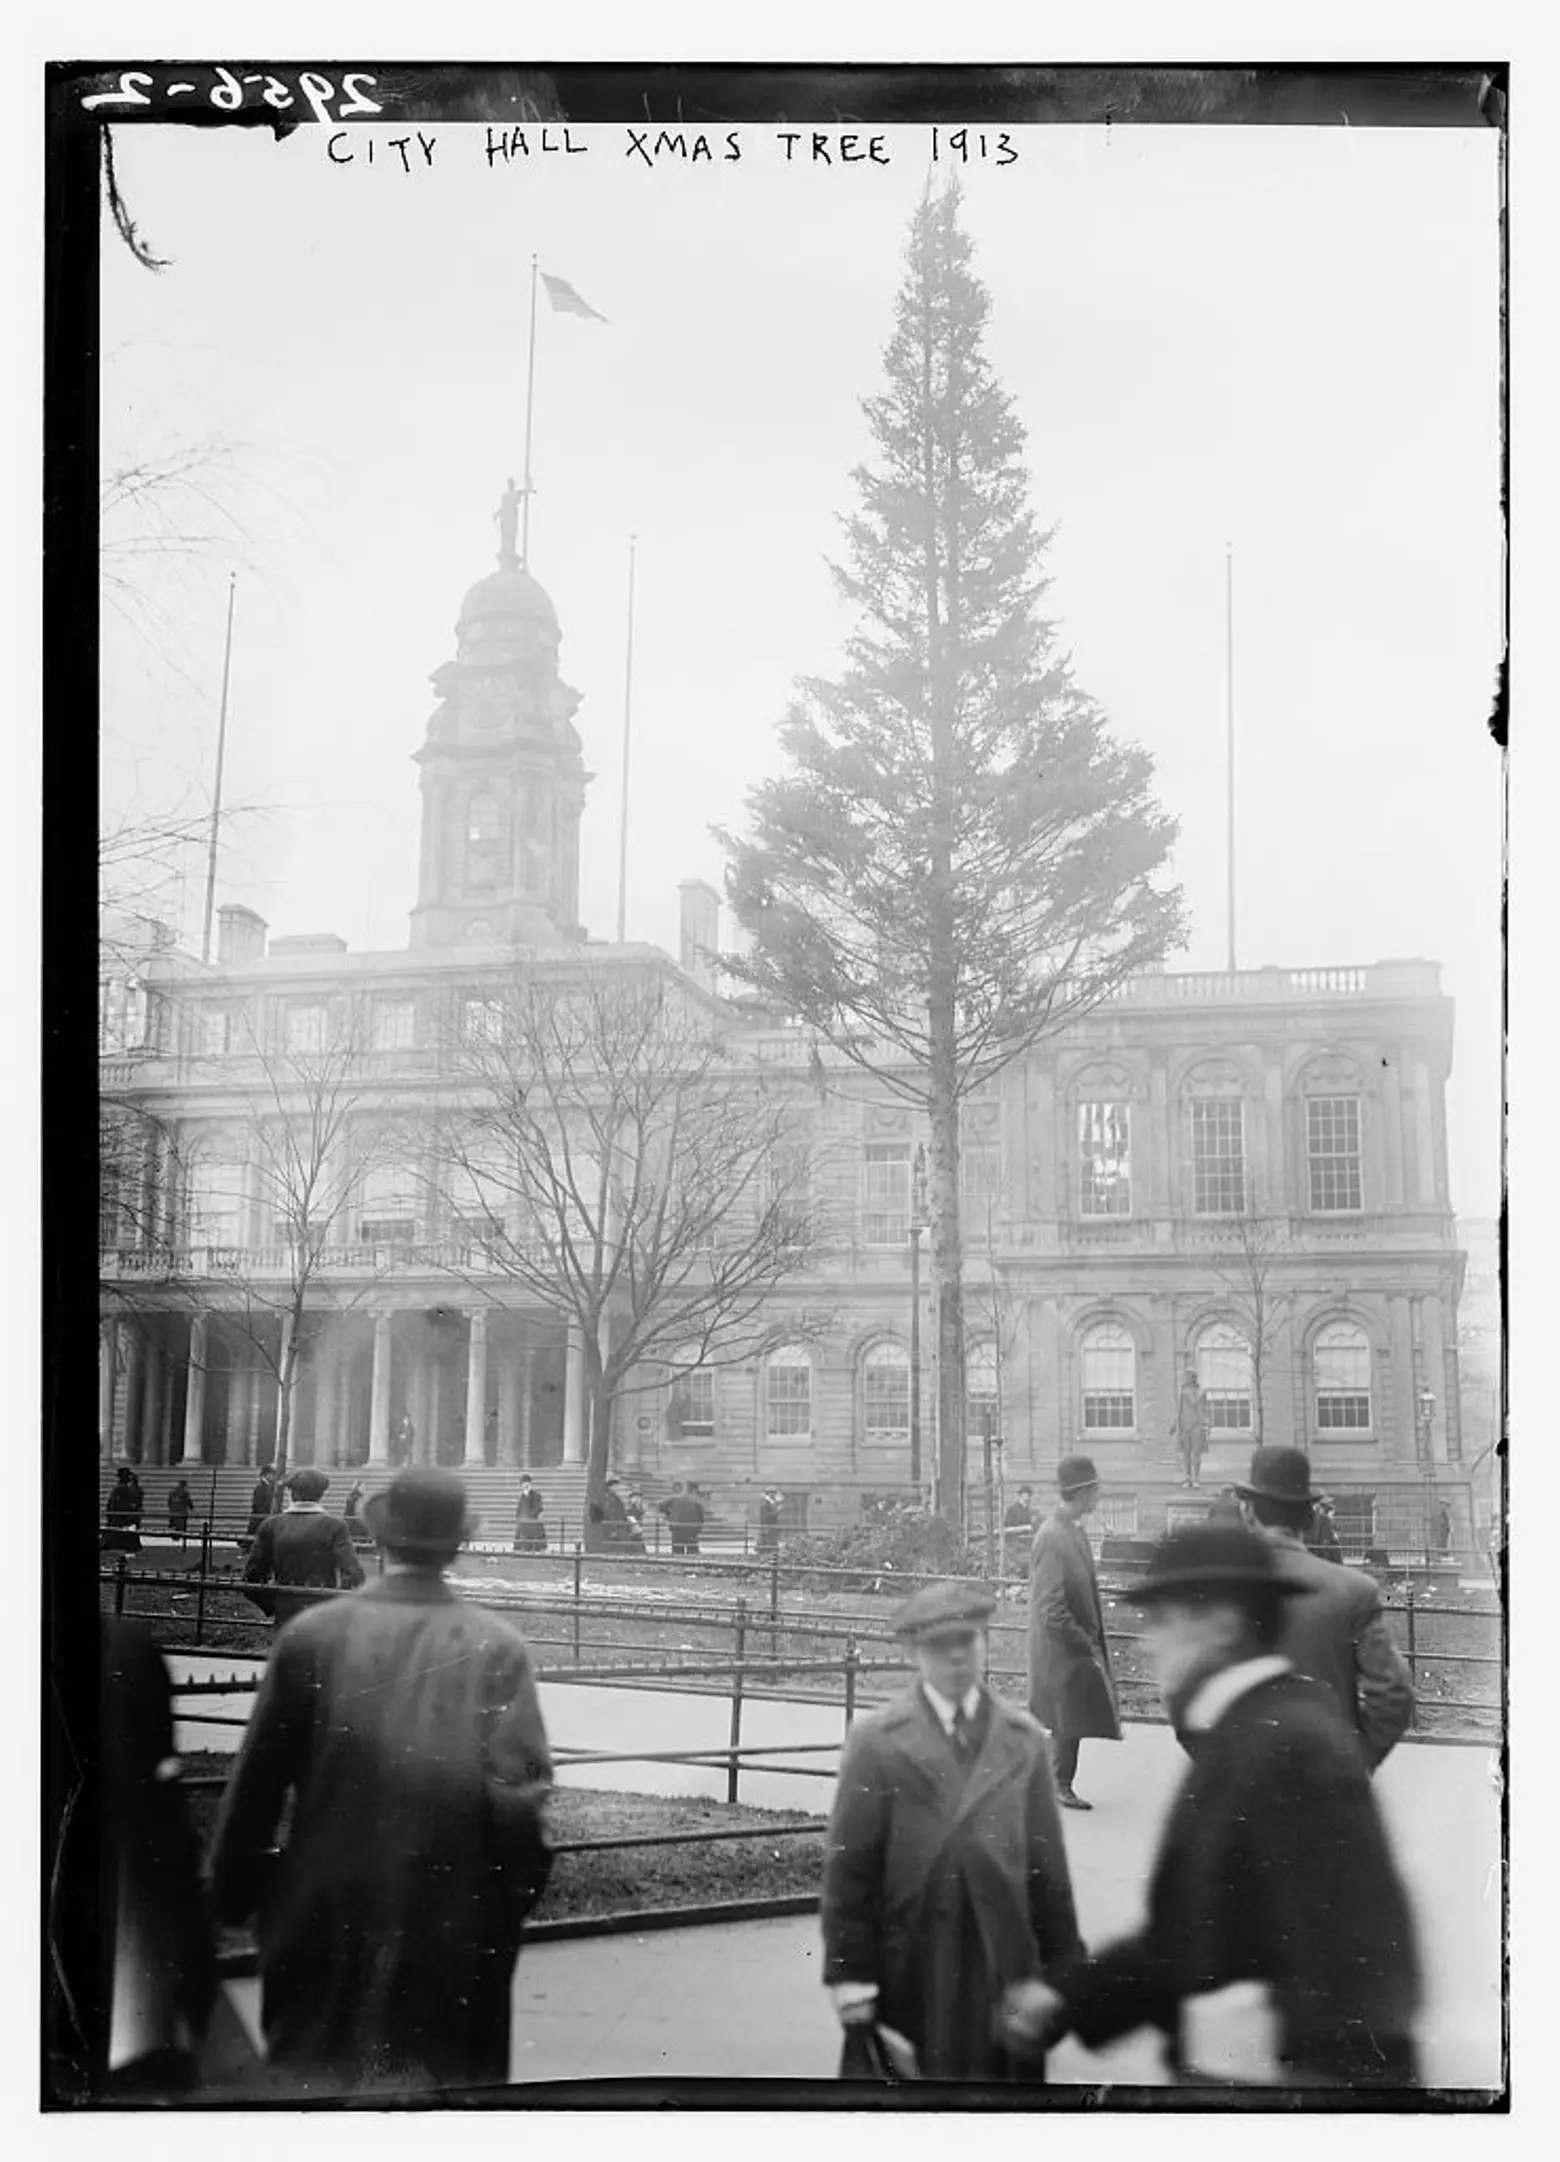 A look back at the City Hall Christmas tree lighting, a bygone NYC tradition